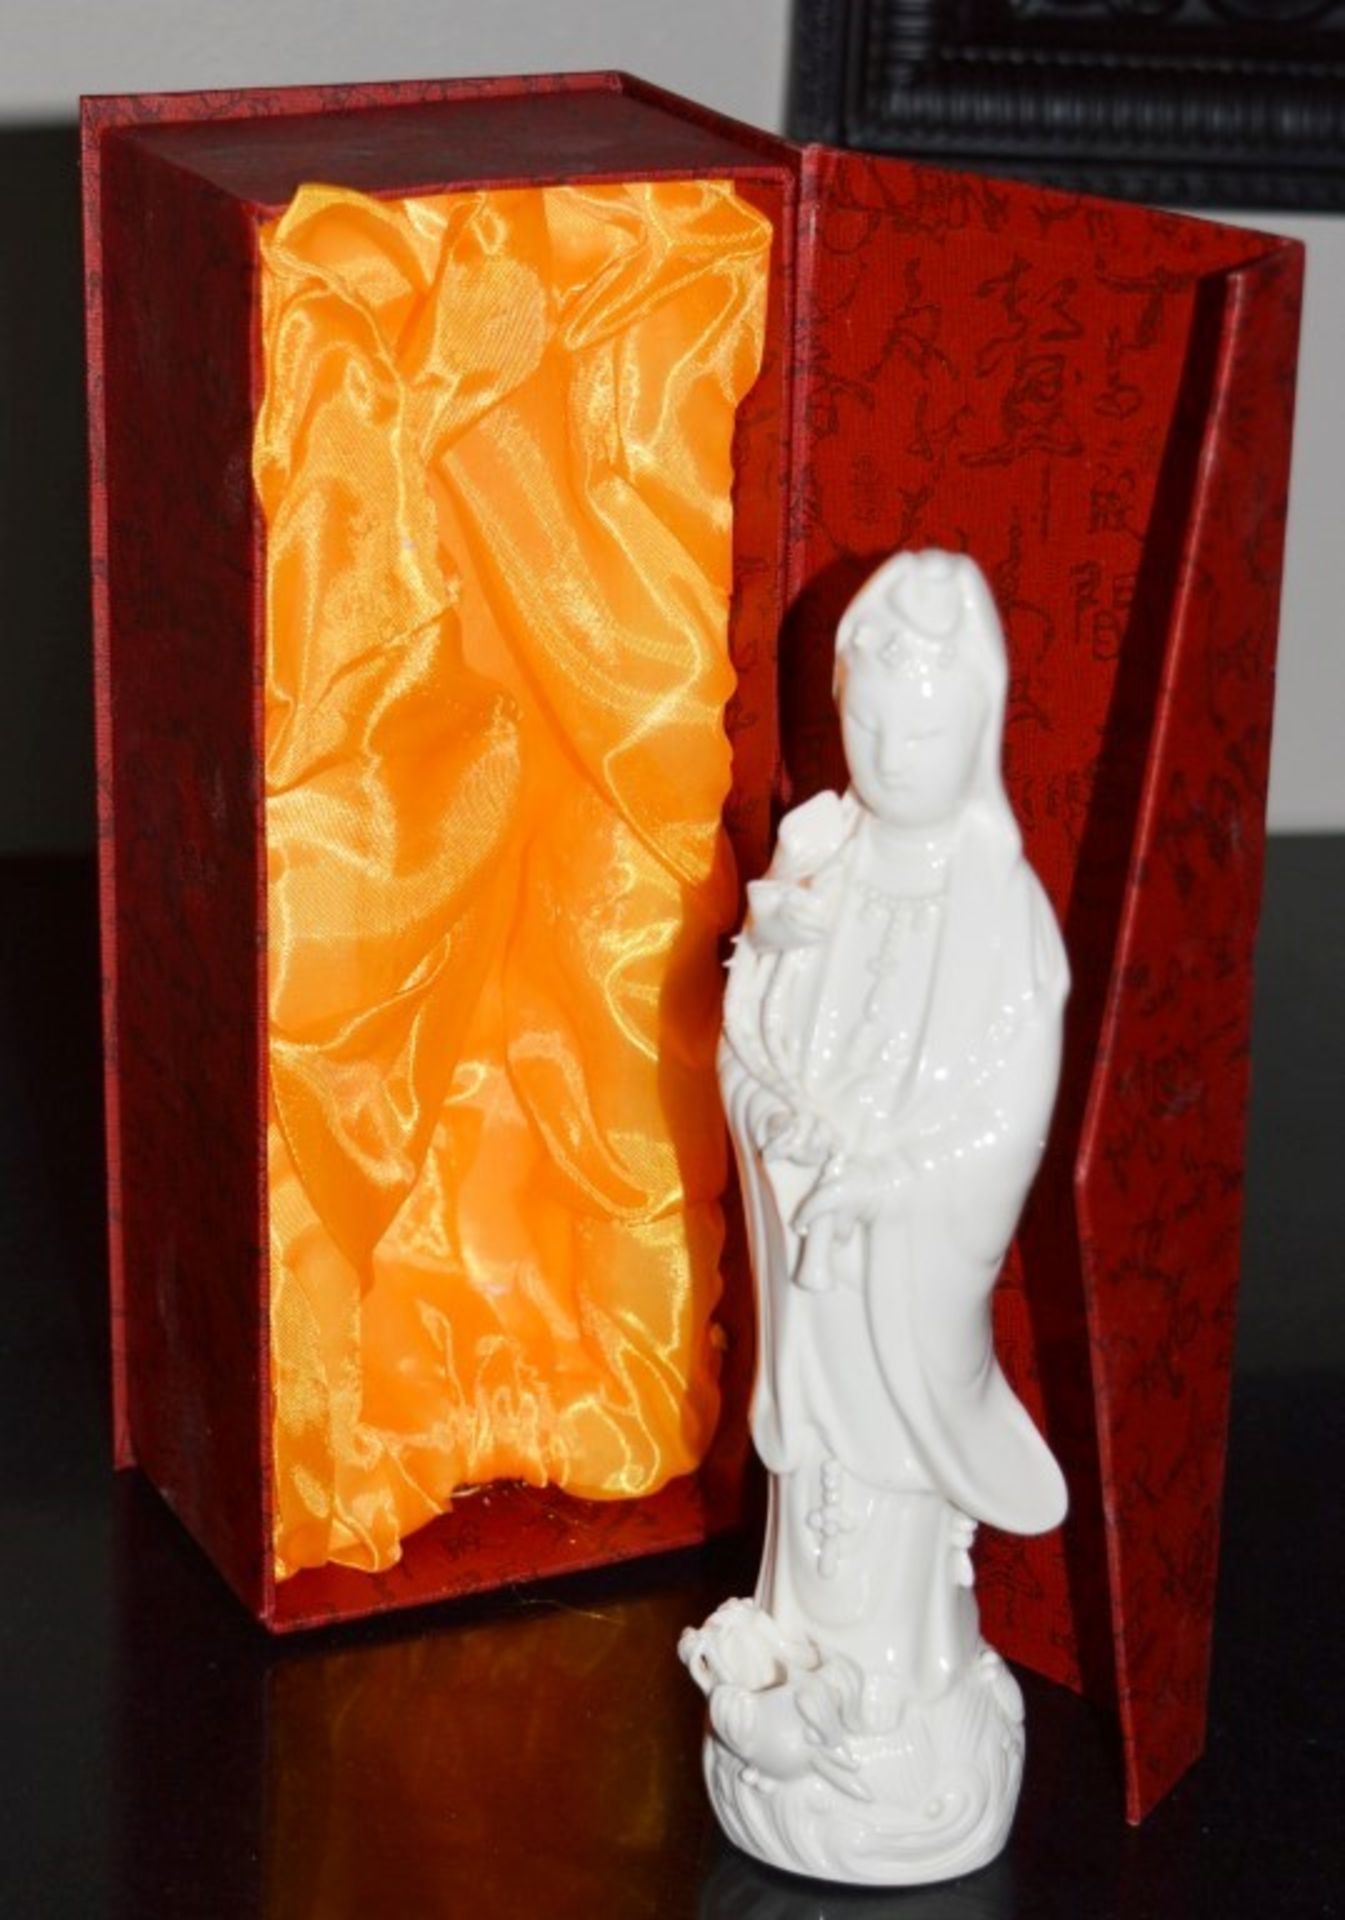 30 x Oriental Chinese Figurines in Gift Boxes - Porcelain Figurines Standing 8 Inches Tall - Brand